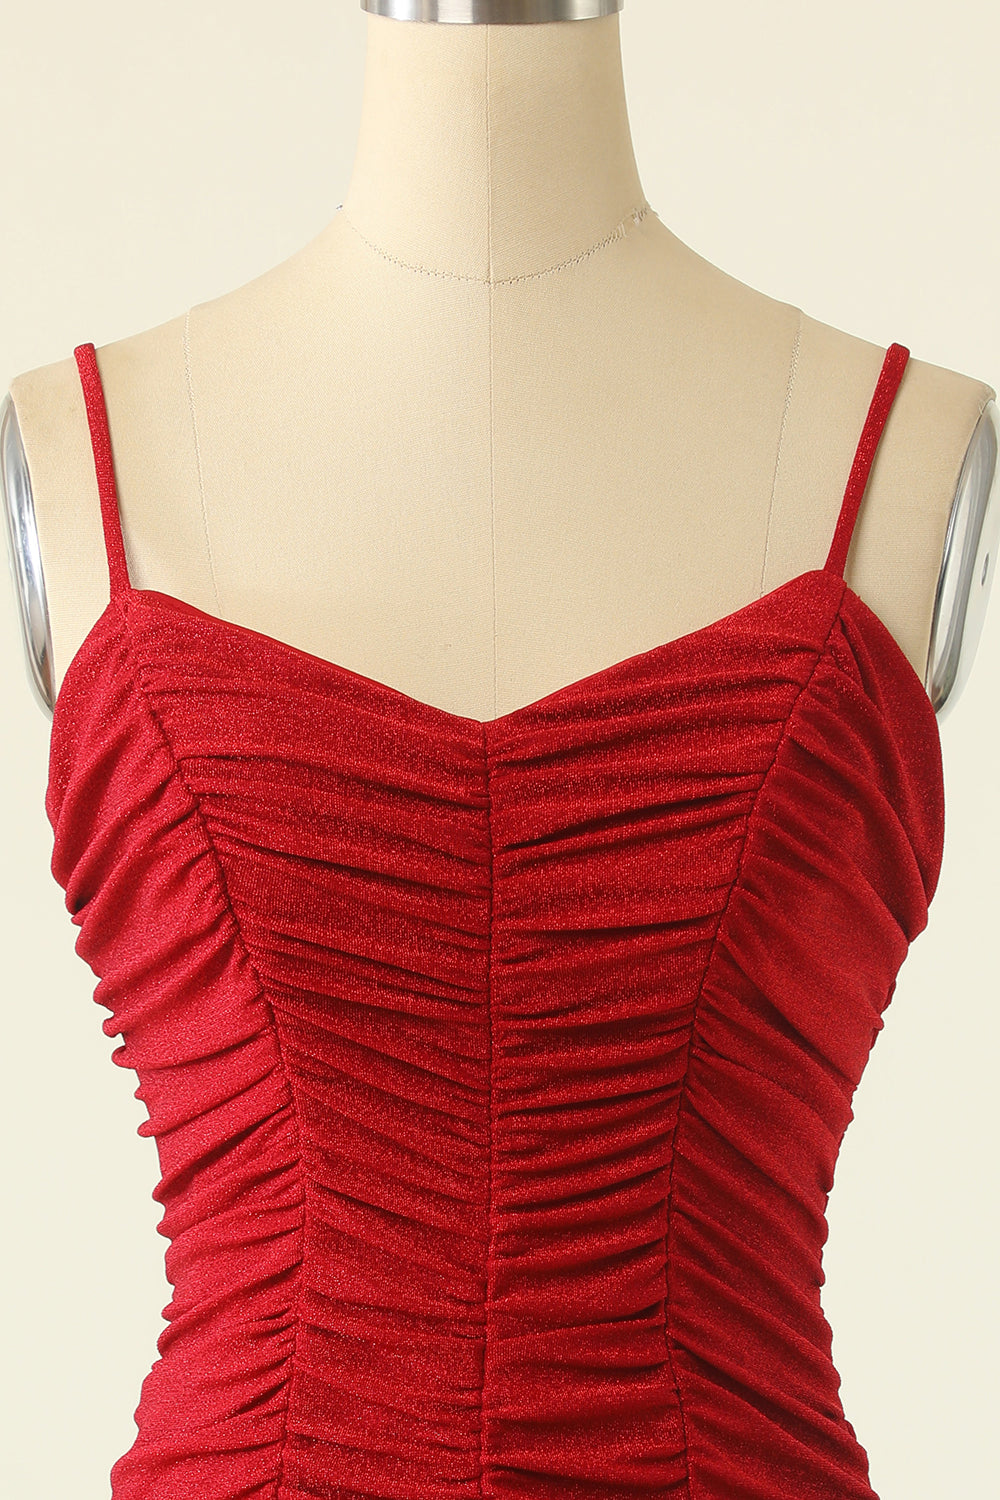 Homecomeing Dresses Red, Red Spaghetti Straps Mini Homecoming Dress With Ruffles